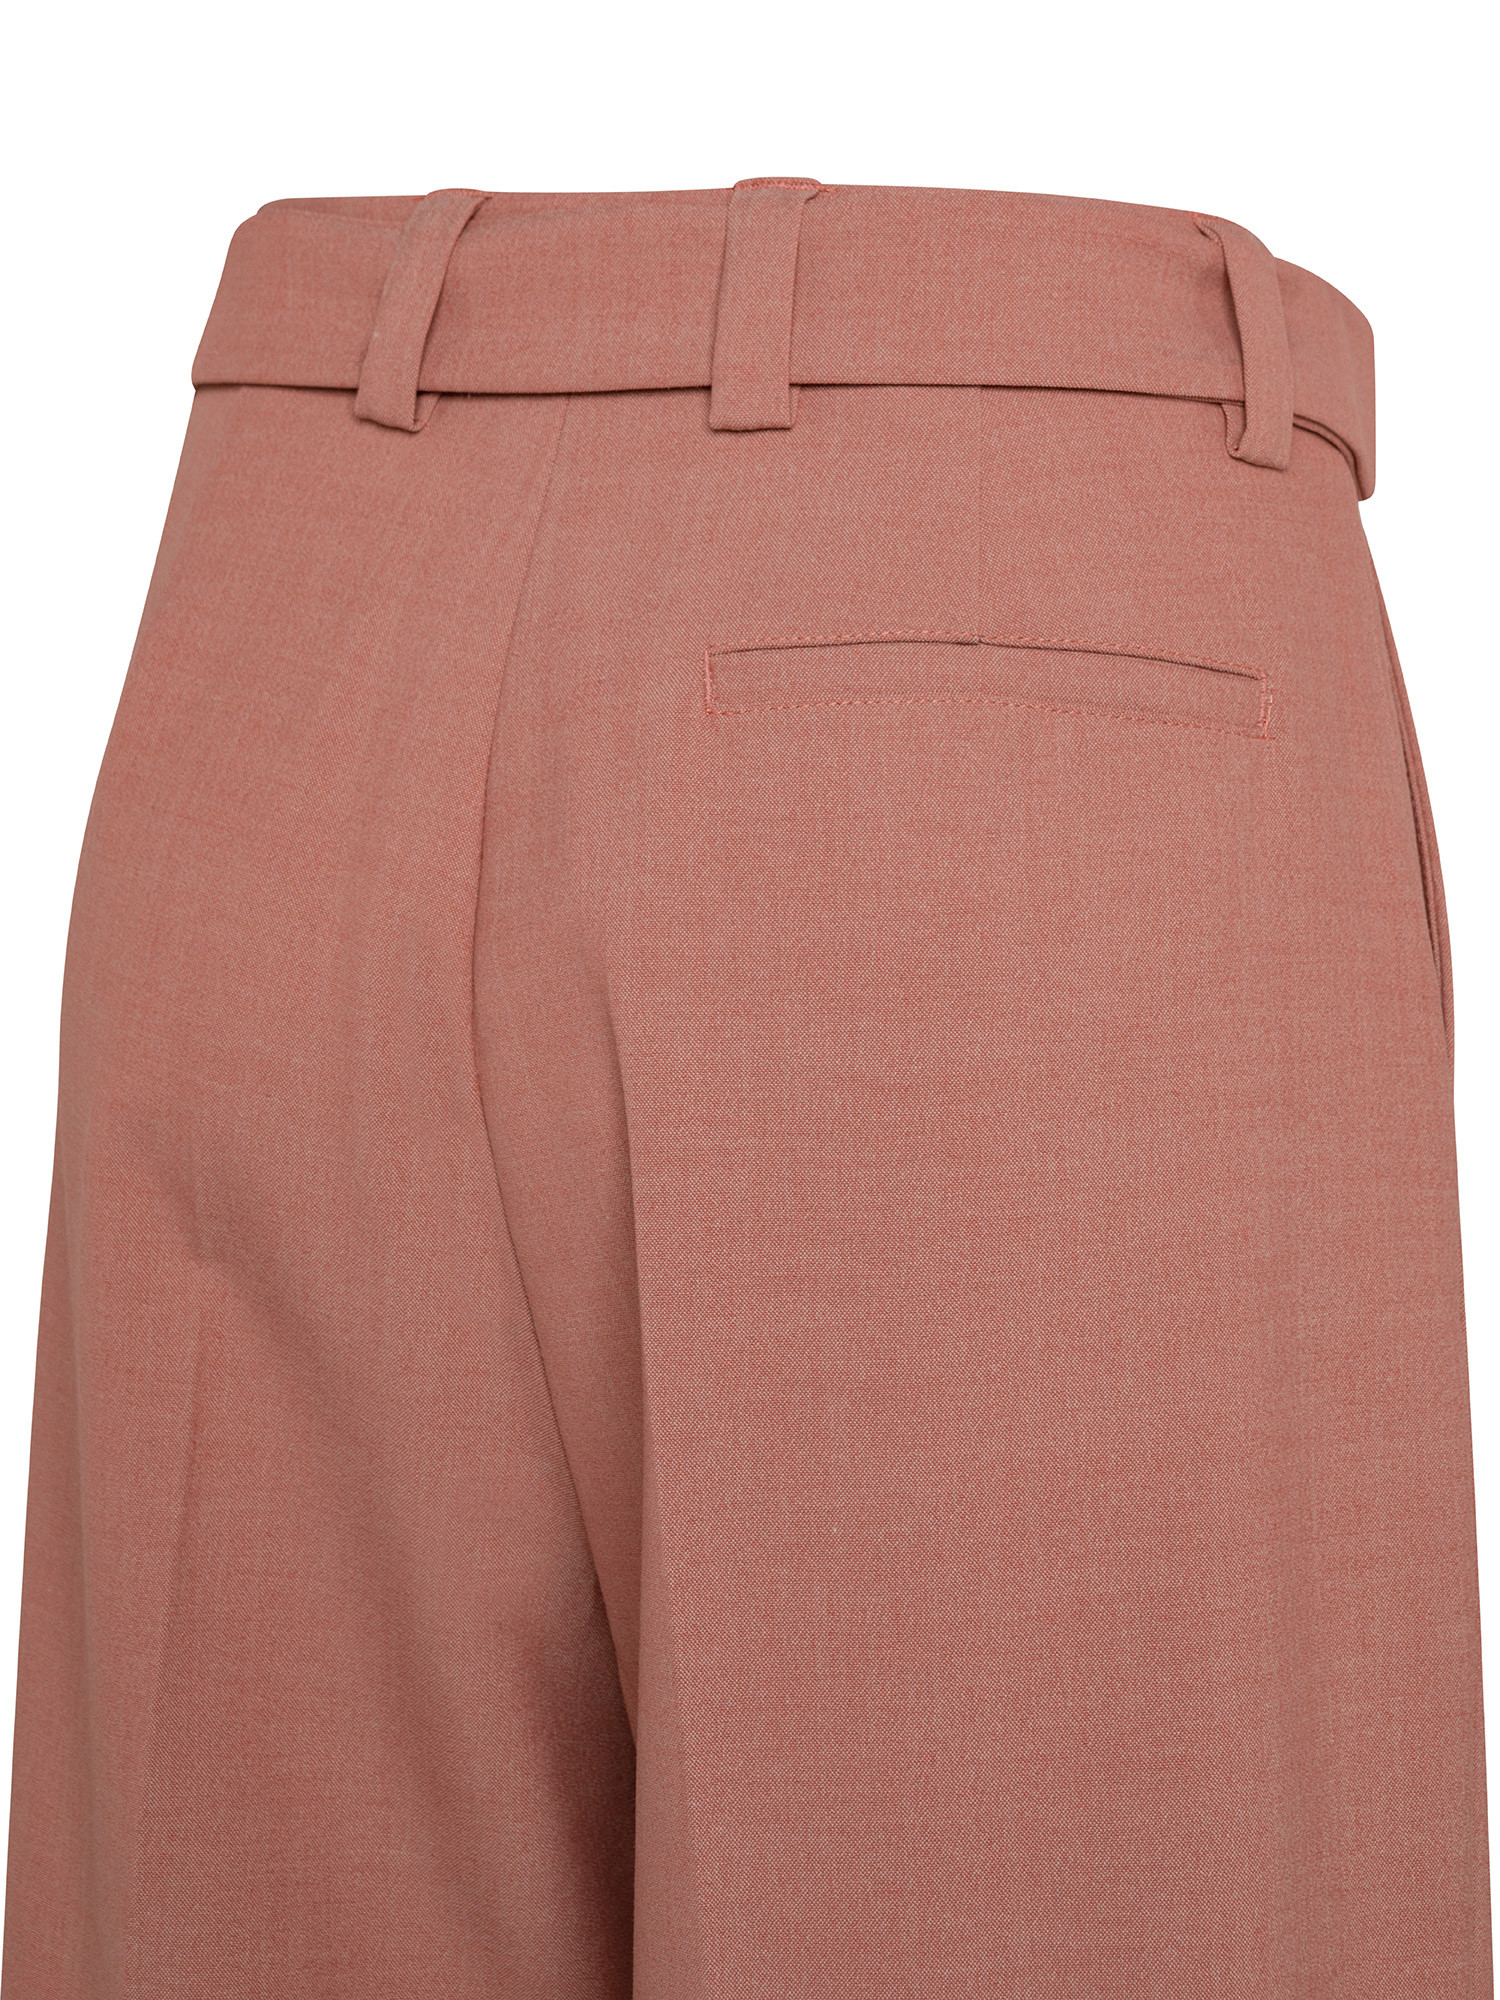 Multicolor pied de poule trousers in polyester-viscose blend with wide leg, Pink, large image number 2